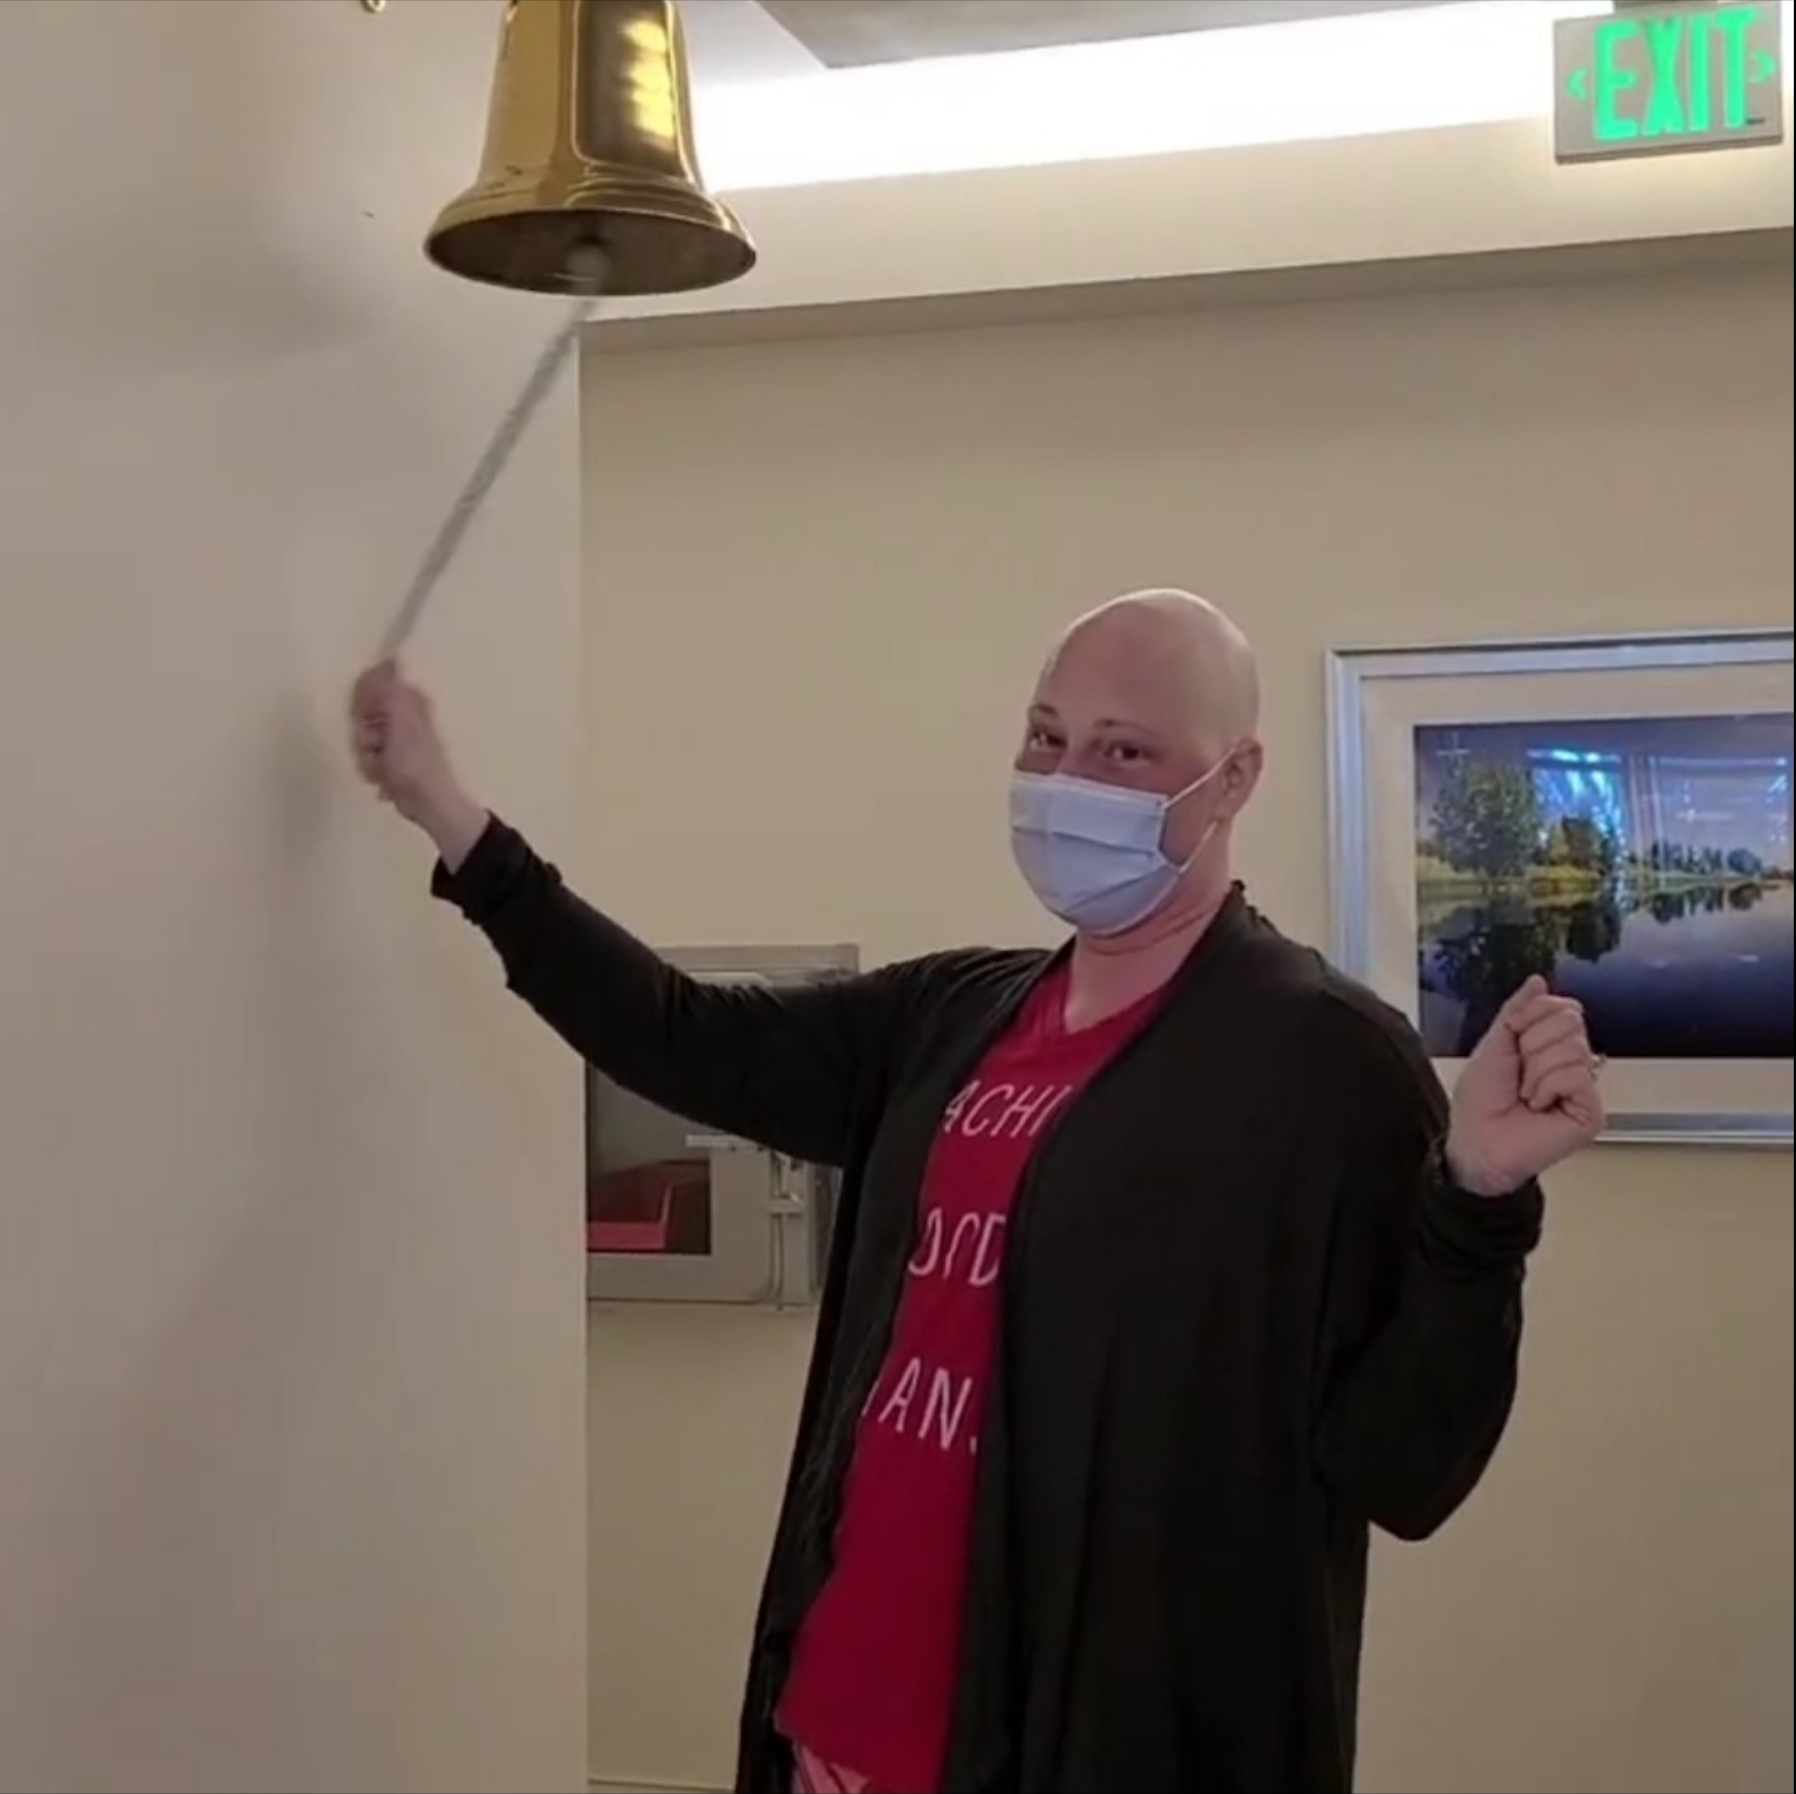 On Jan. 18, Sabrina King got to ring the bell, signifying the end of her chemotherapy treatment. (Courtesy)